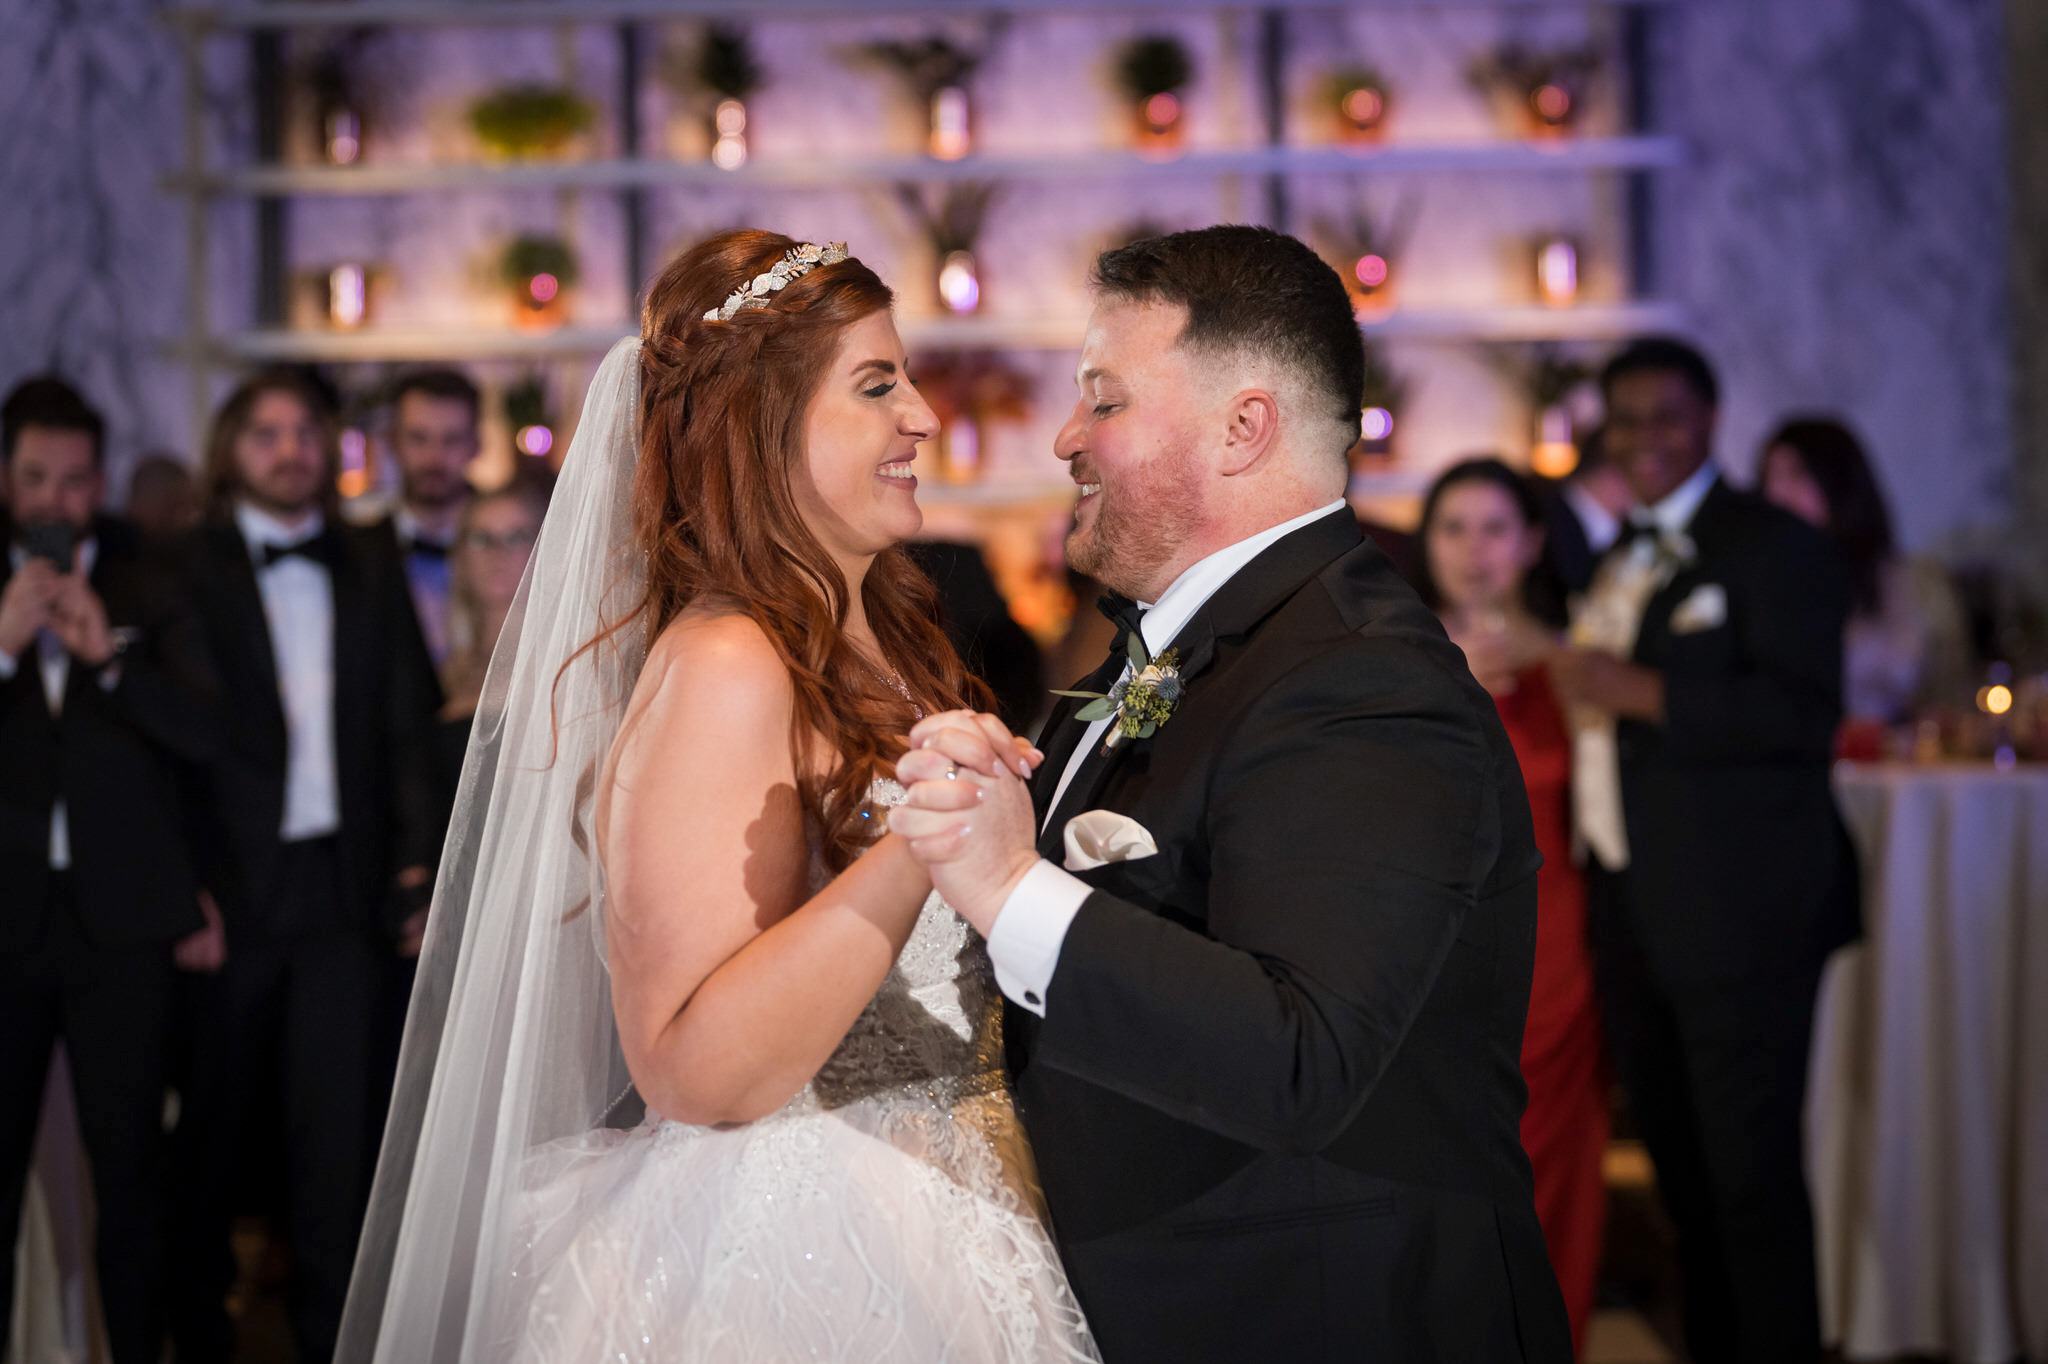 Accented with purple uplighting, a bride and groom share a first dance at their Shinola Hotel wedding reception.